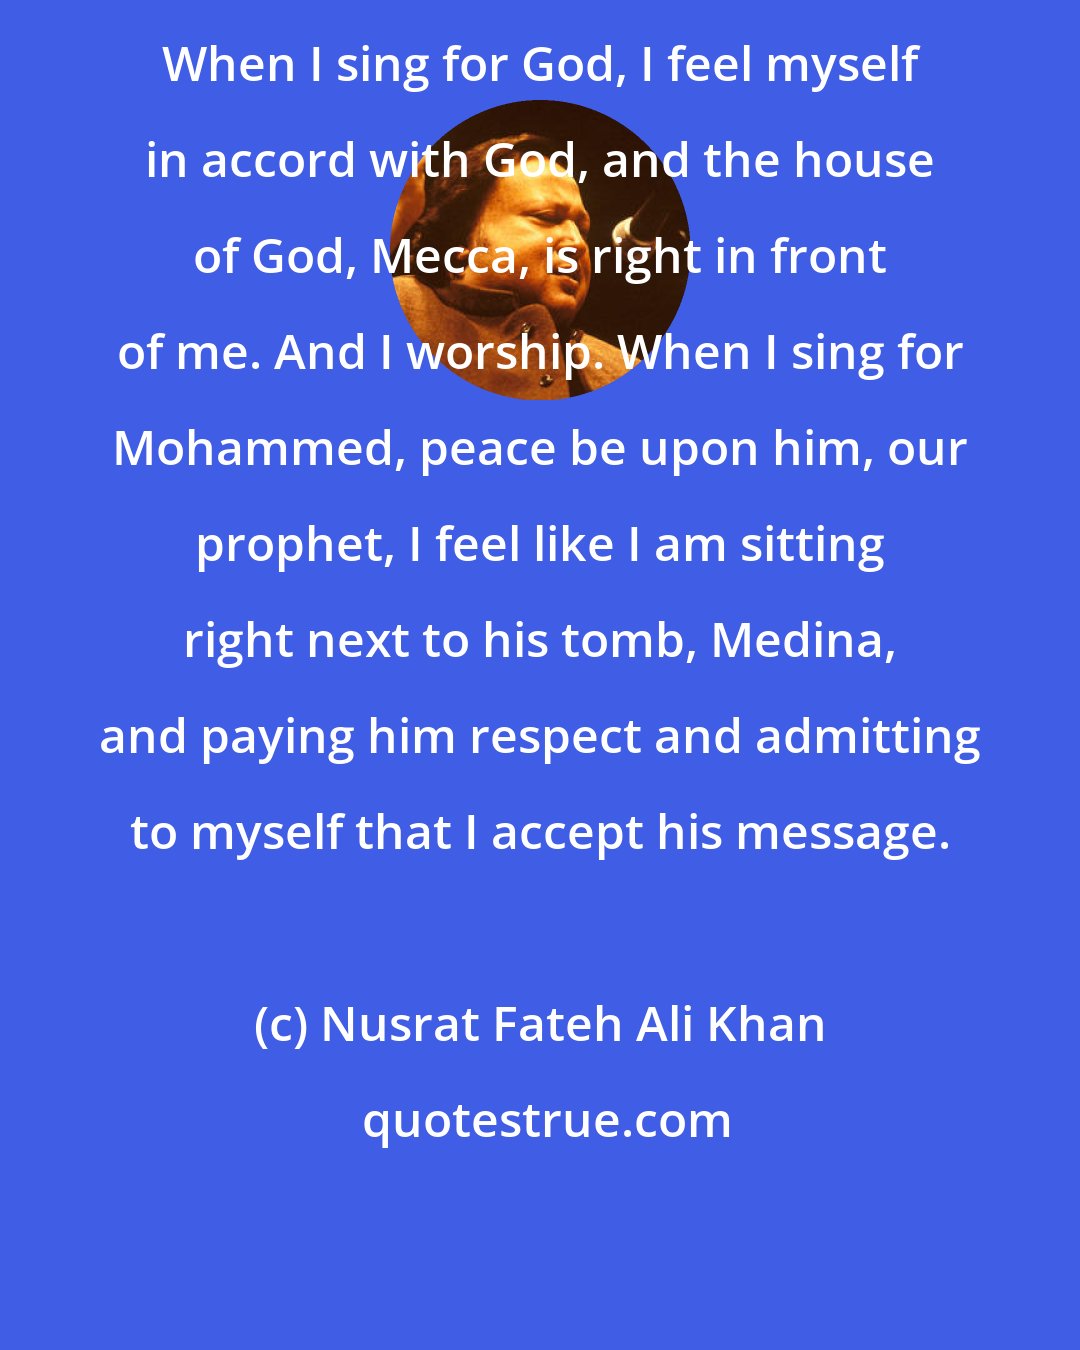 Nusrat Fateh Ali Khan: When I sing for God, I feel myself in accord with God, and the house of God, Mecca, is right in front of me. And I worship. When I sing for Mohammed, peace be upon him, our prophet, I feel like I am sitting right next to his tomb, Medina, and paying him respect and admitting to myself that I accept his message.